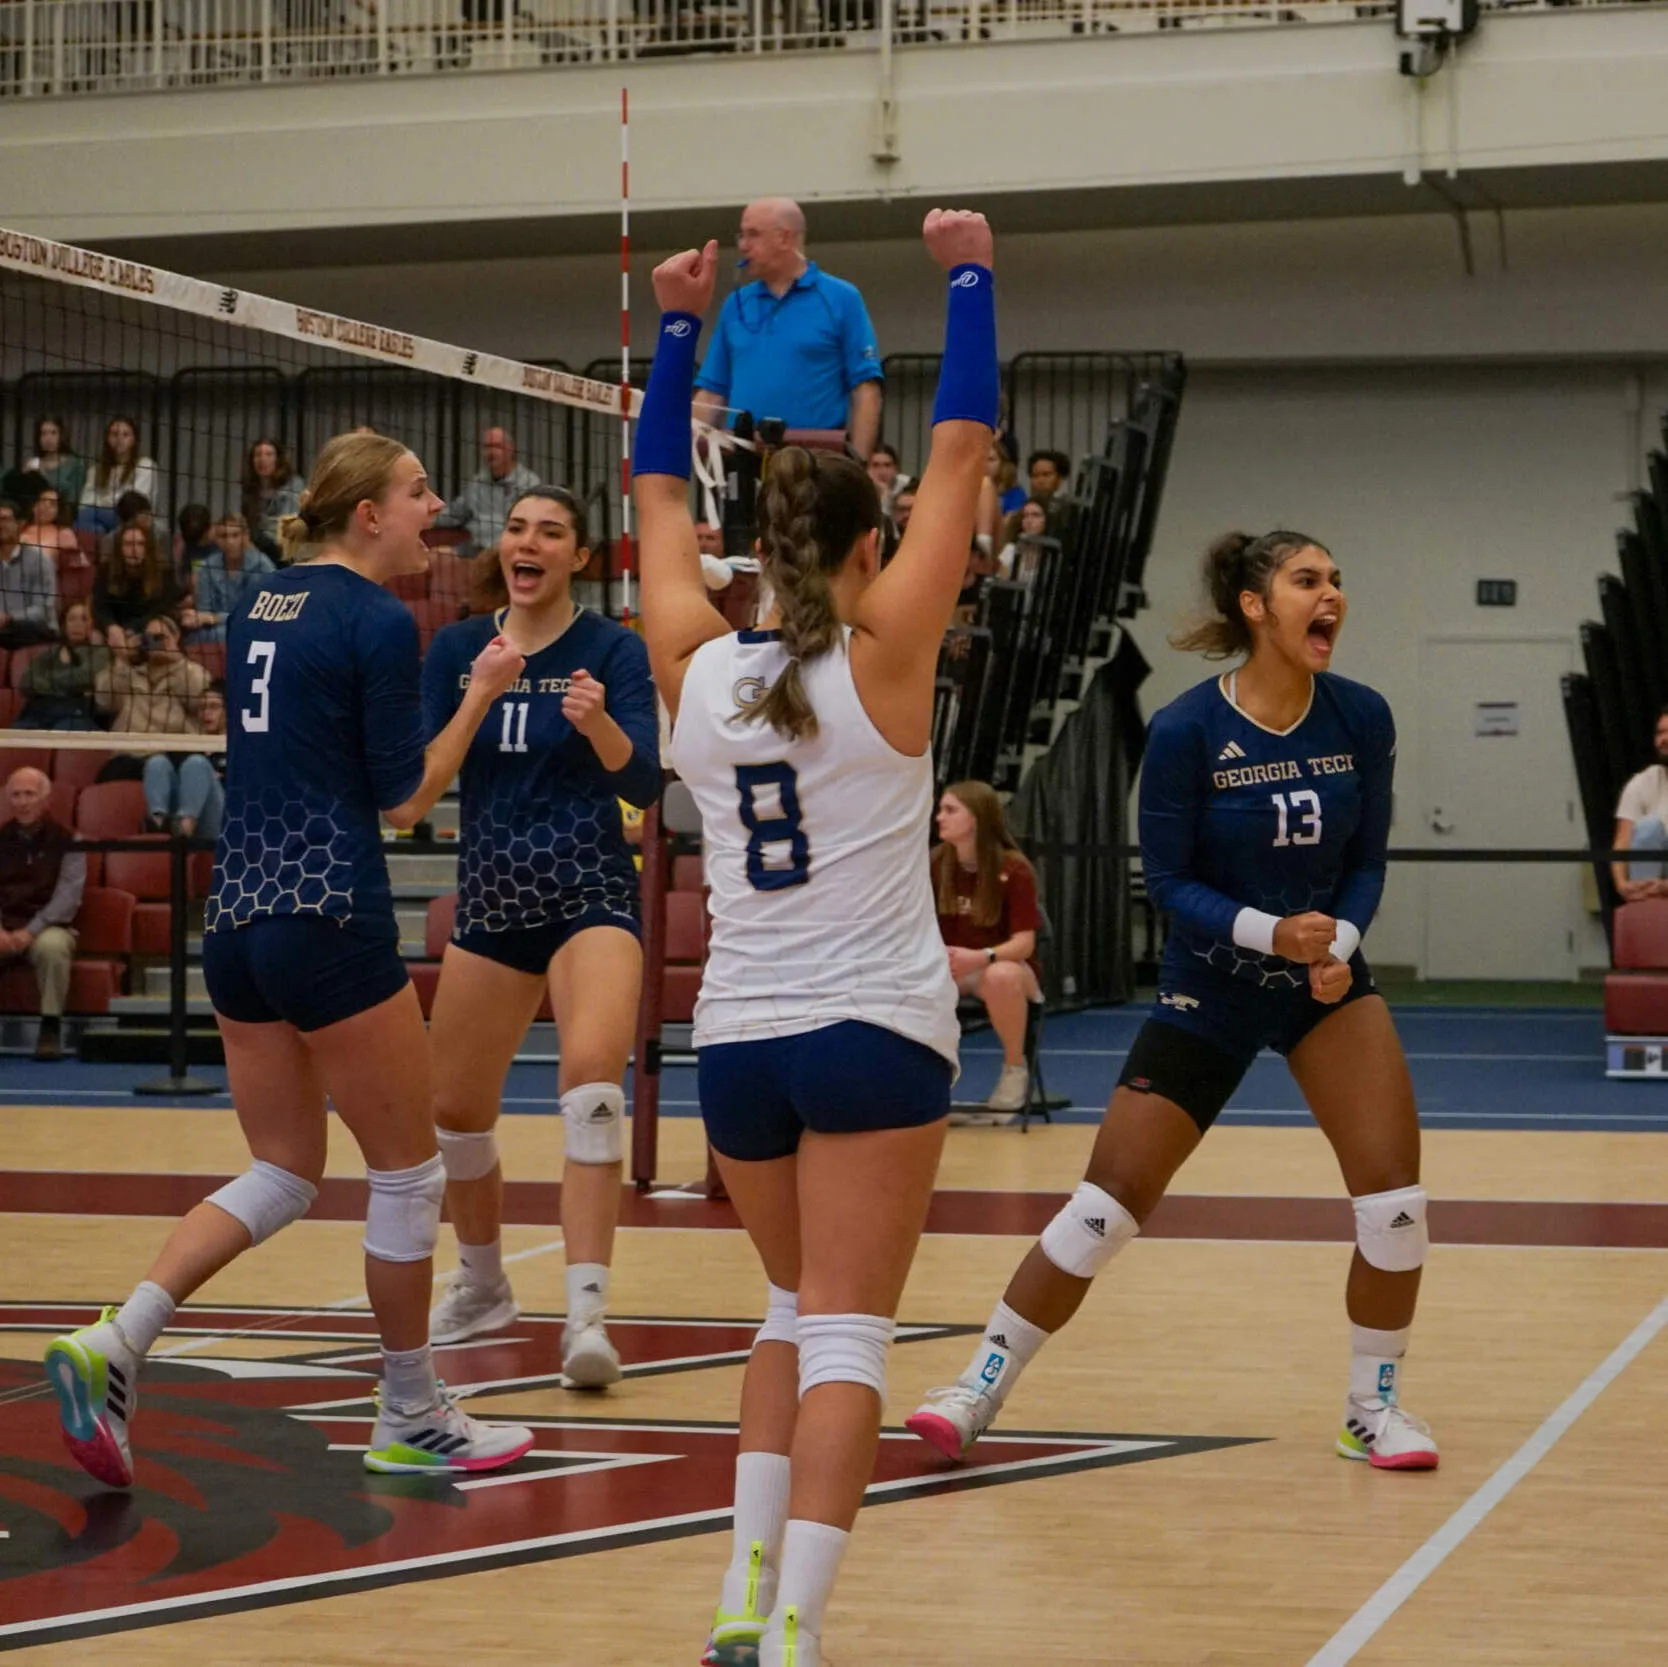 Volleyball against Boston College